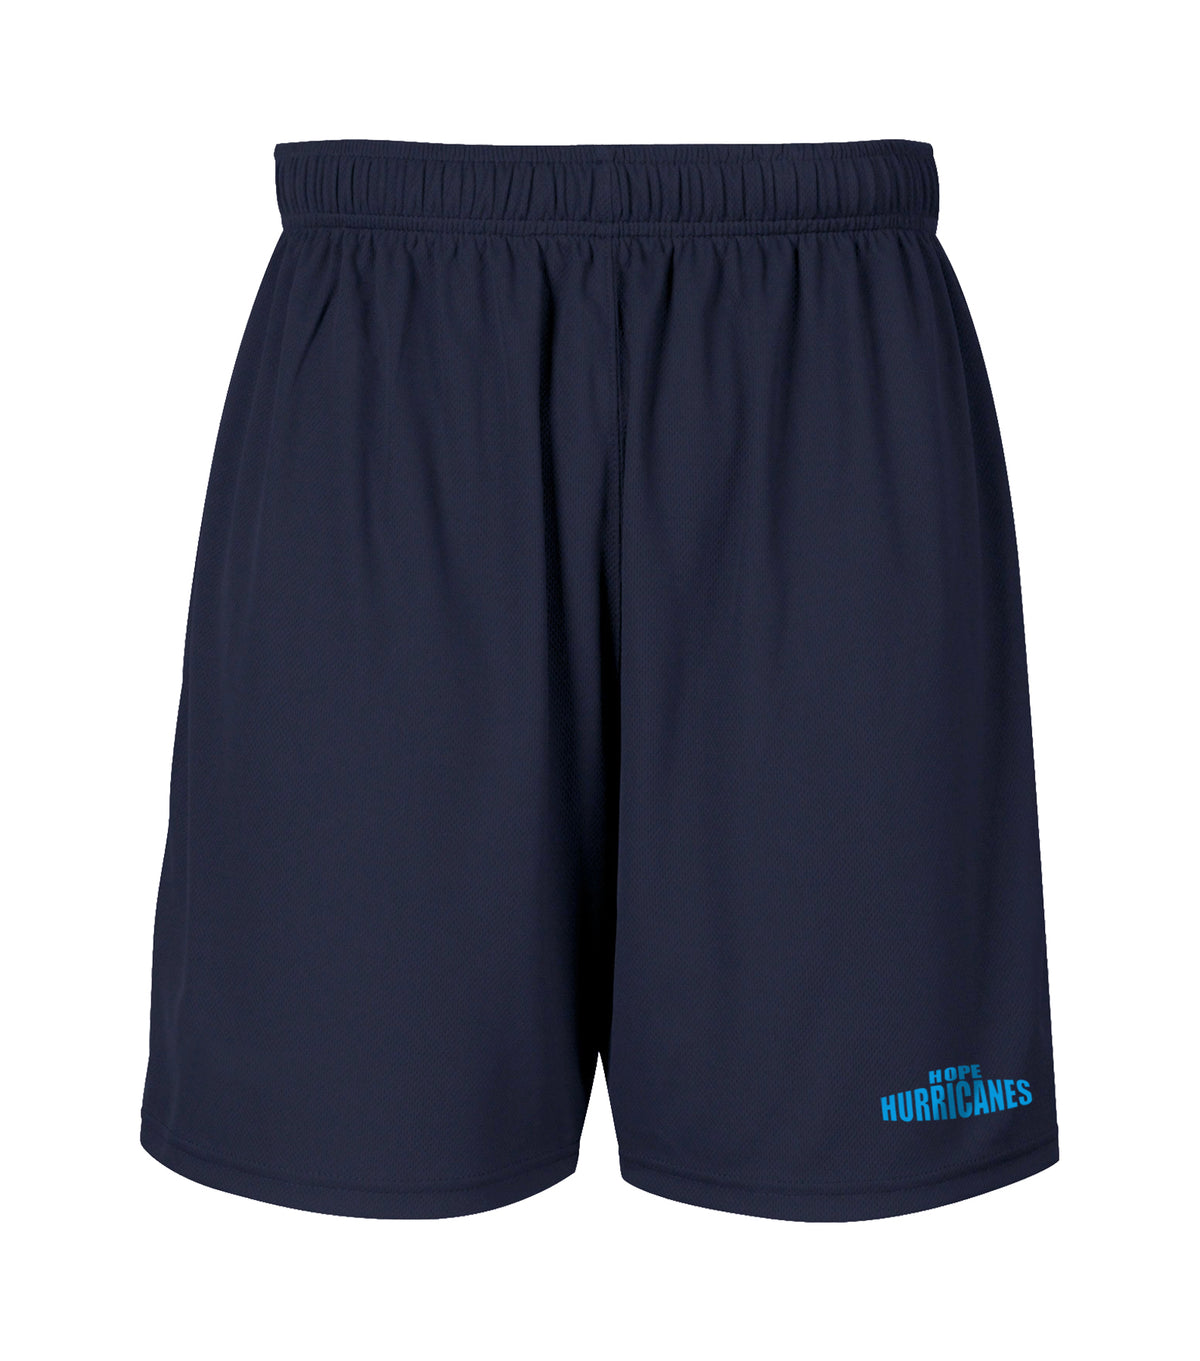 HOPE LUTHERAN GYM SHORTS, YOUTH